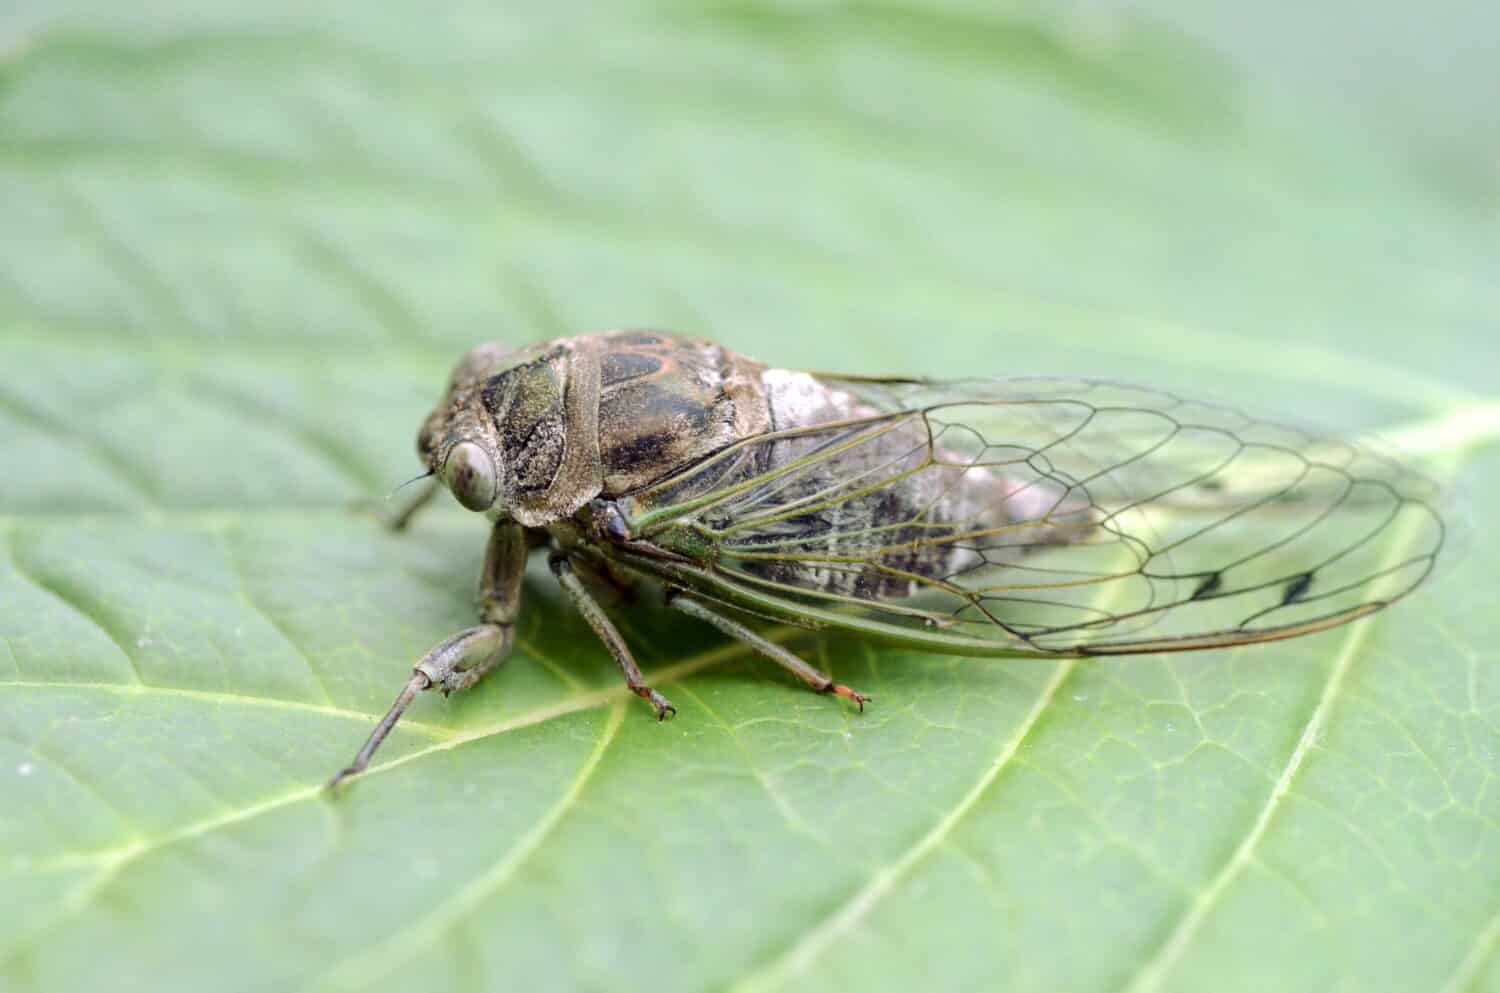 Dog-day cicada (Neotibicen canicularis) on a green leaf side view macro image